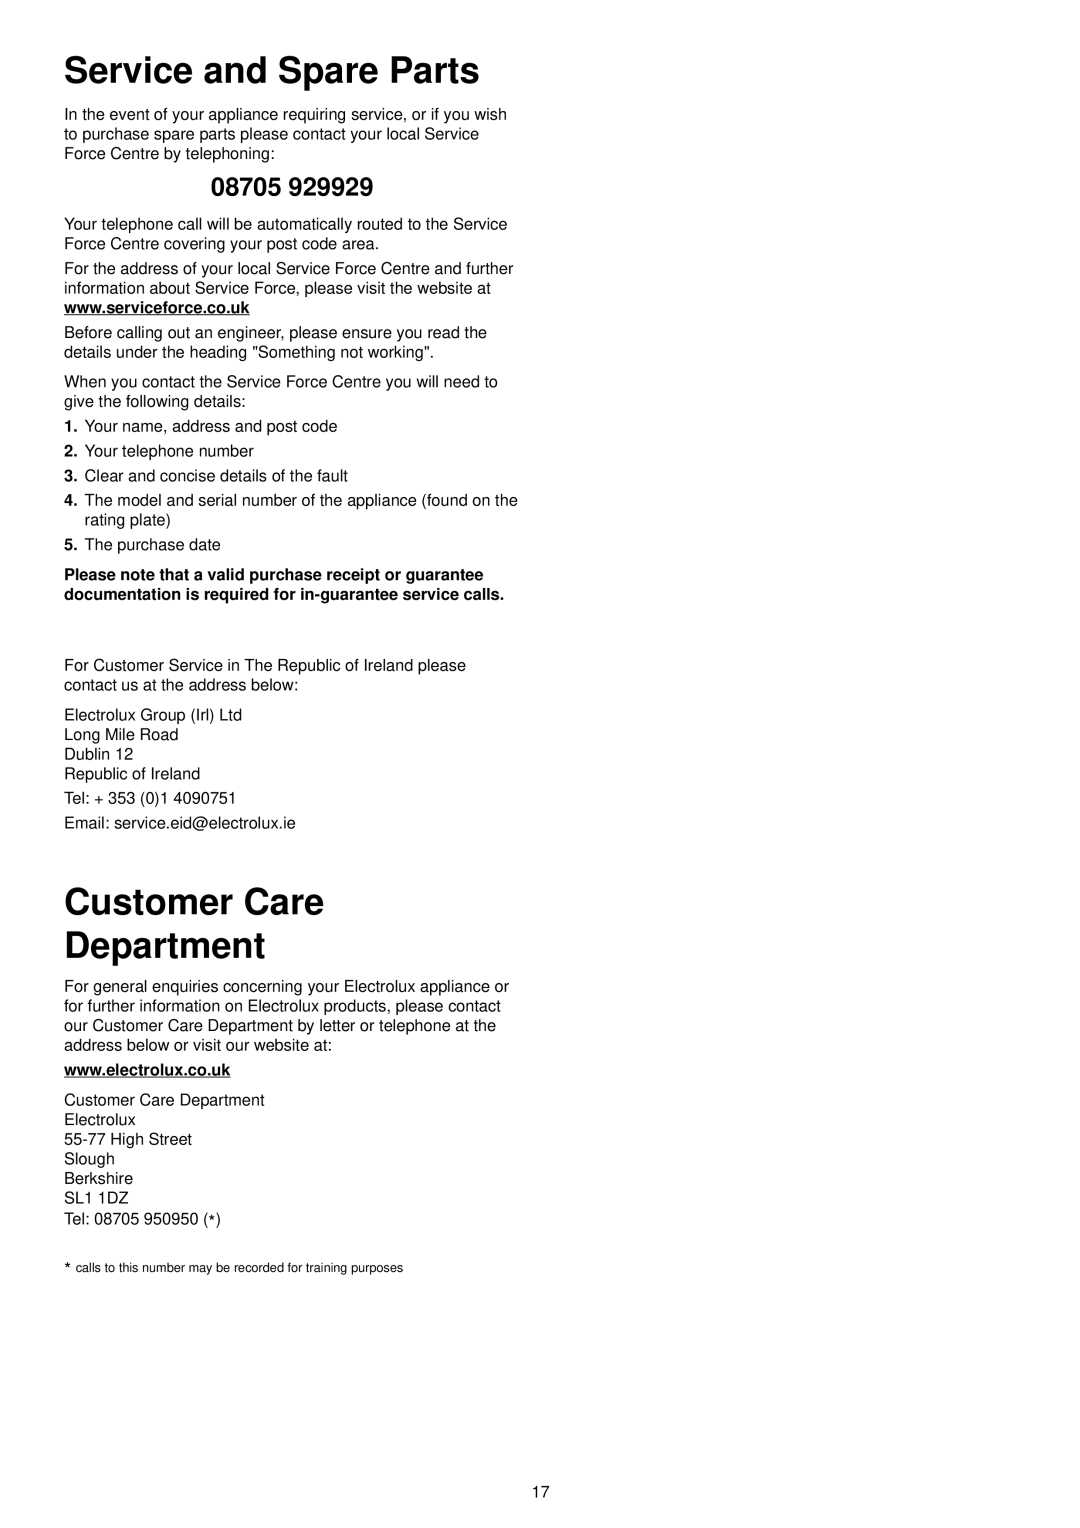 Electrolux ESI 6105 manual Service and Spare Parts, Customer Care Department 